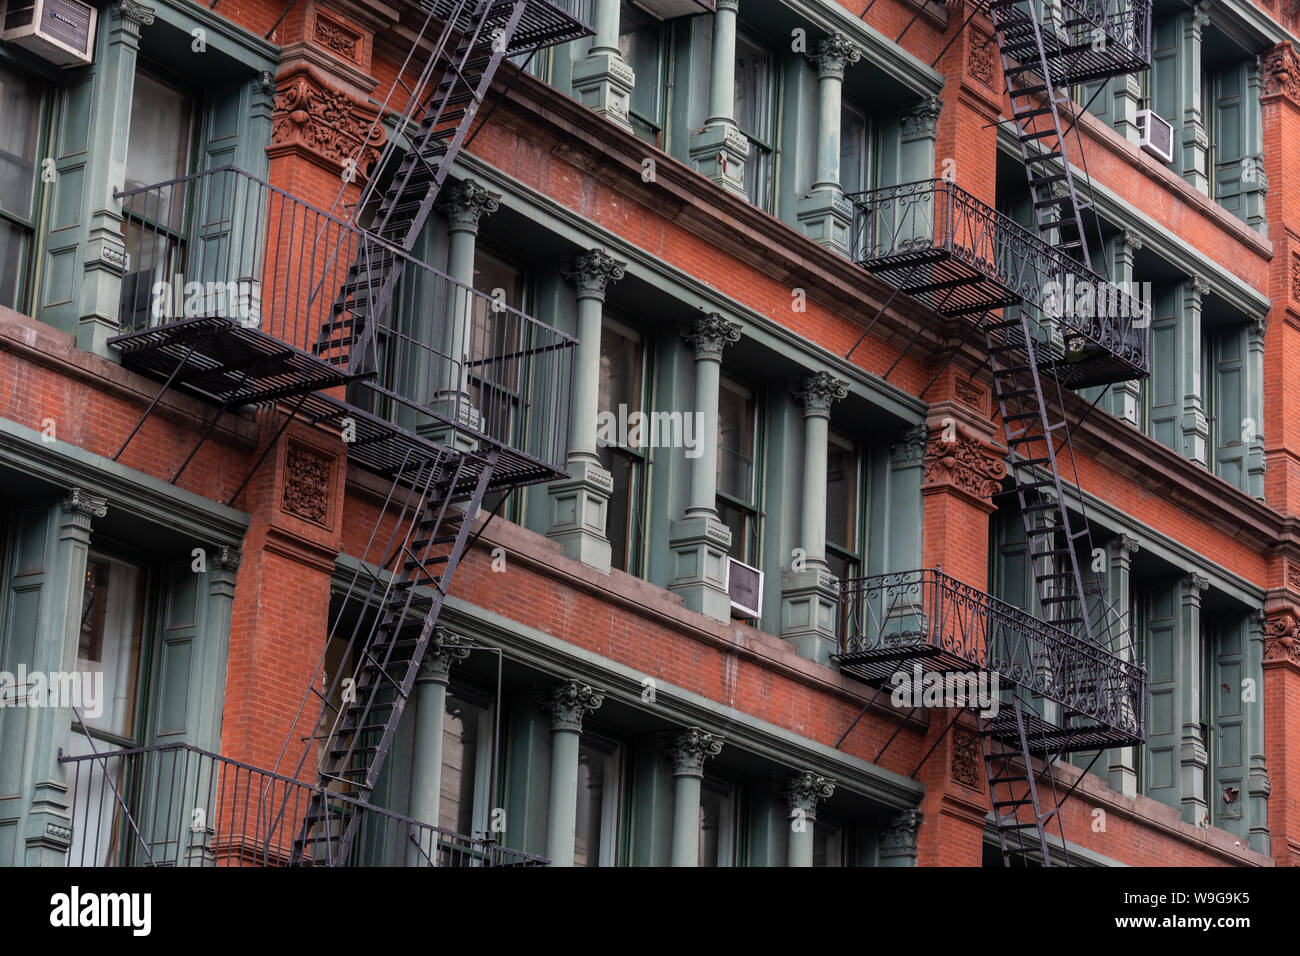 A fire escape of an apartment building in New York city Stock Photo